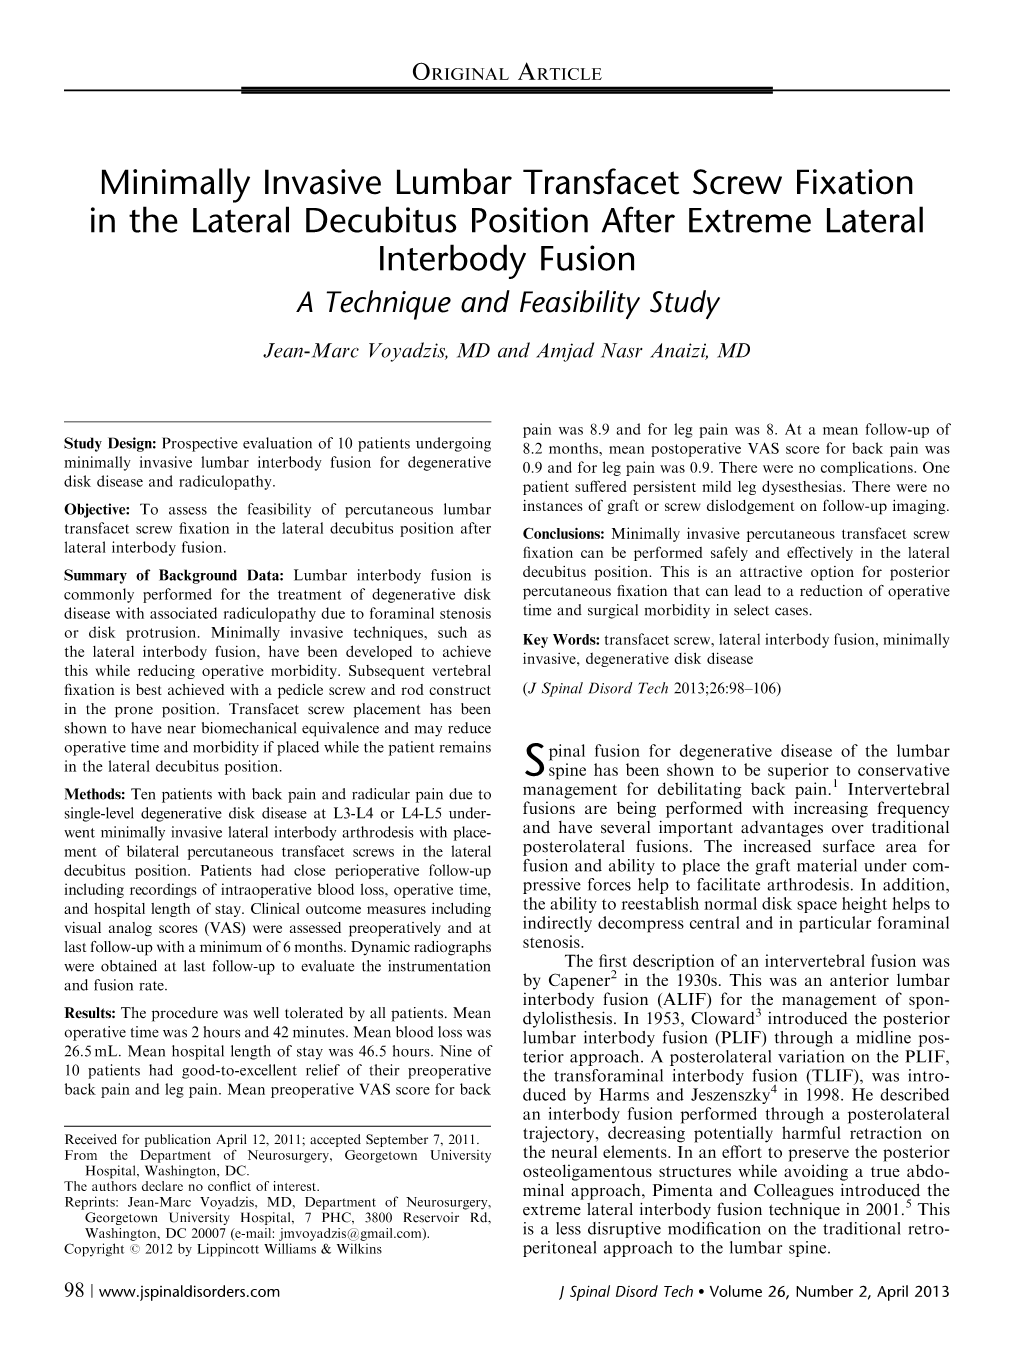 Minimally Invasive Lumbar Transfacet Screw Fixation in the Lateral Decubitus Position After Extreme Lateral Interbody Fusion a Technique and Feasibility Study